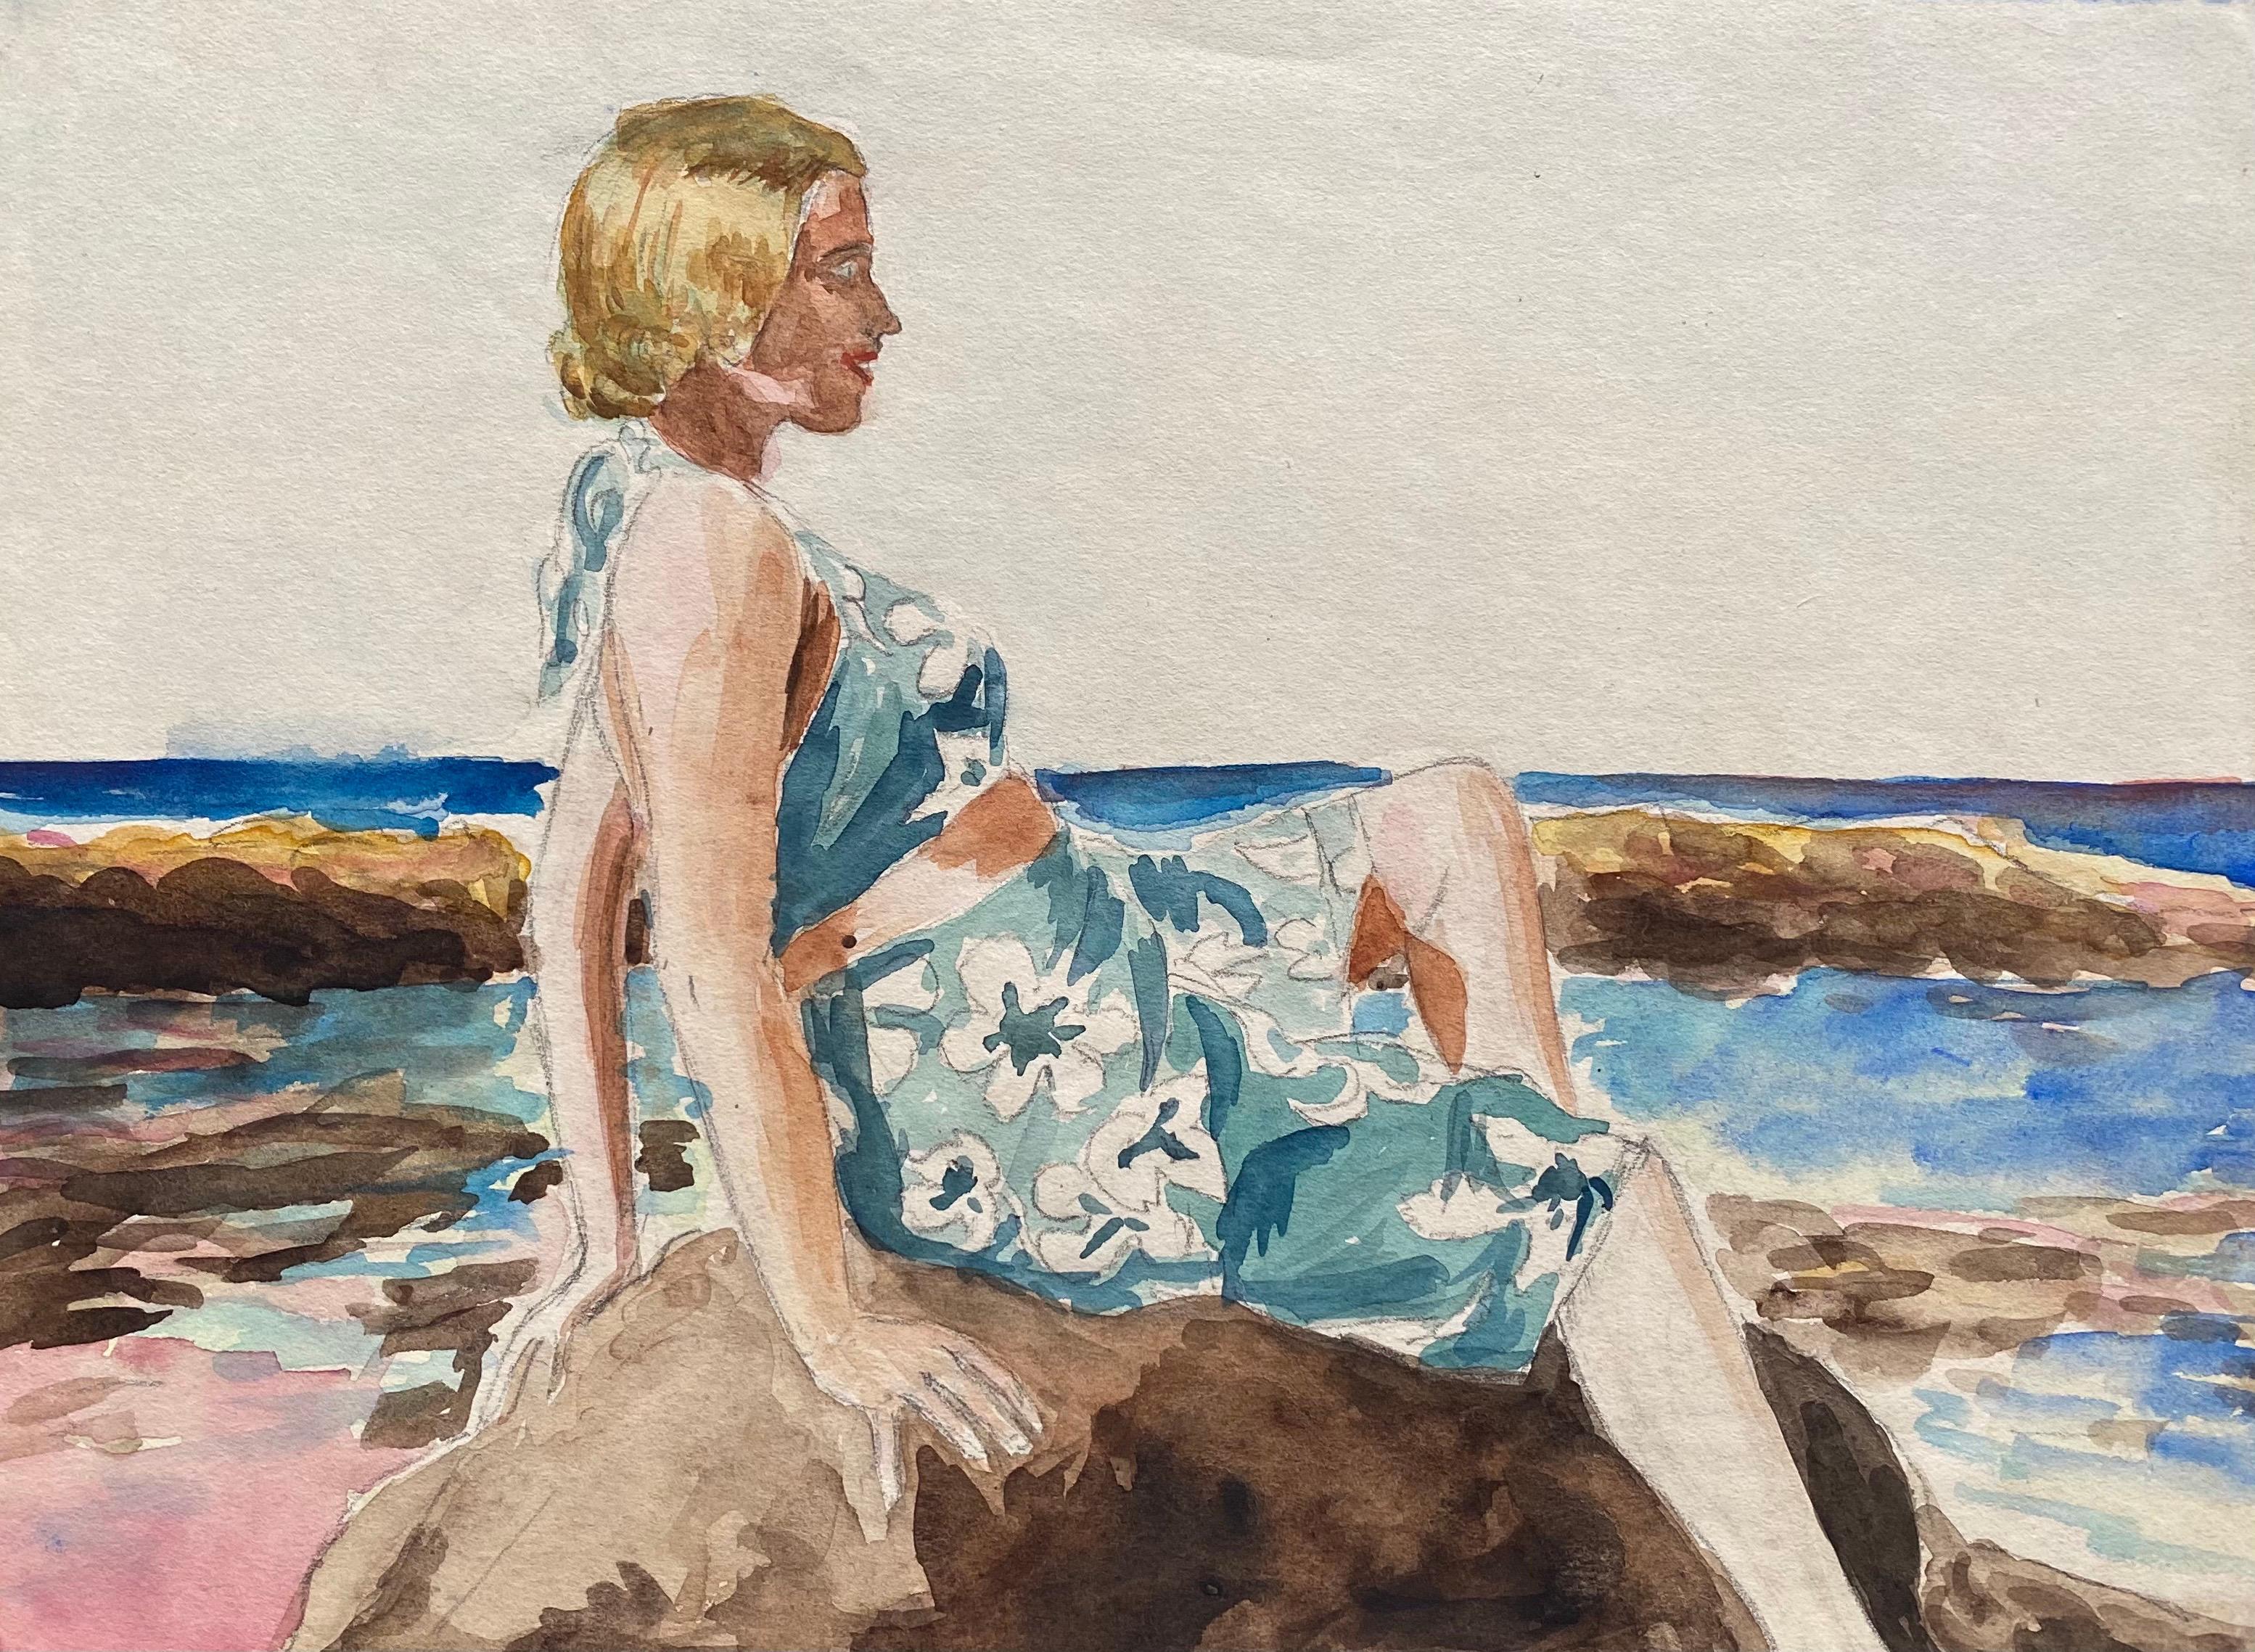 Artist/ School: French School, early 20th century

Title: Sur la Plage

Medium: watercolor on artists paper

Size: painting: 8 x 10 inches
 
Provenance: private collection, France

Condition: The painting is in very good condition.
 